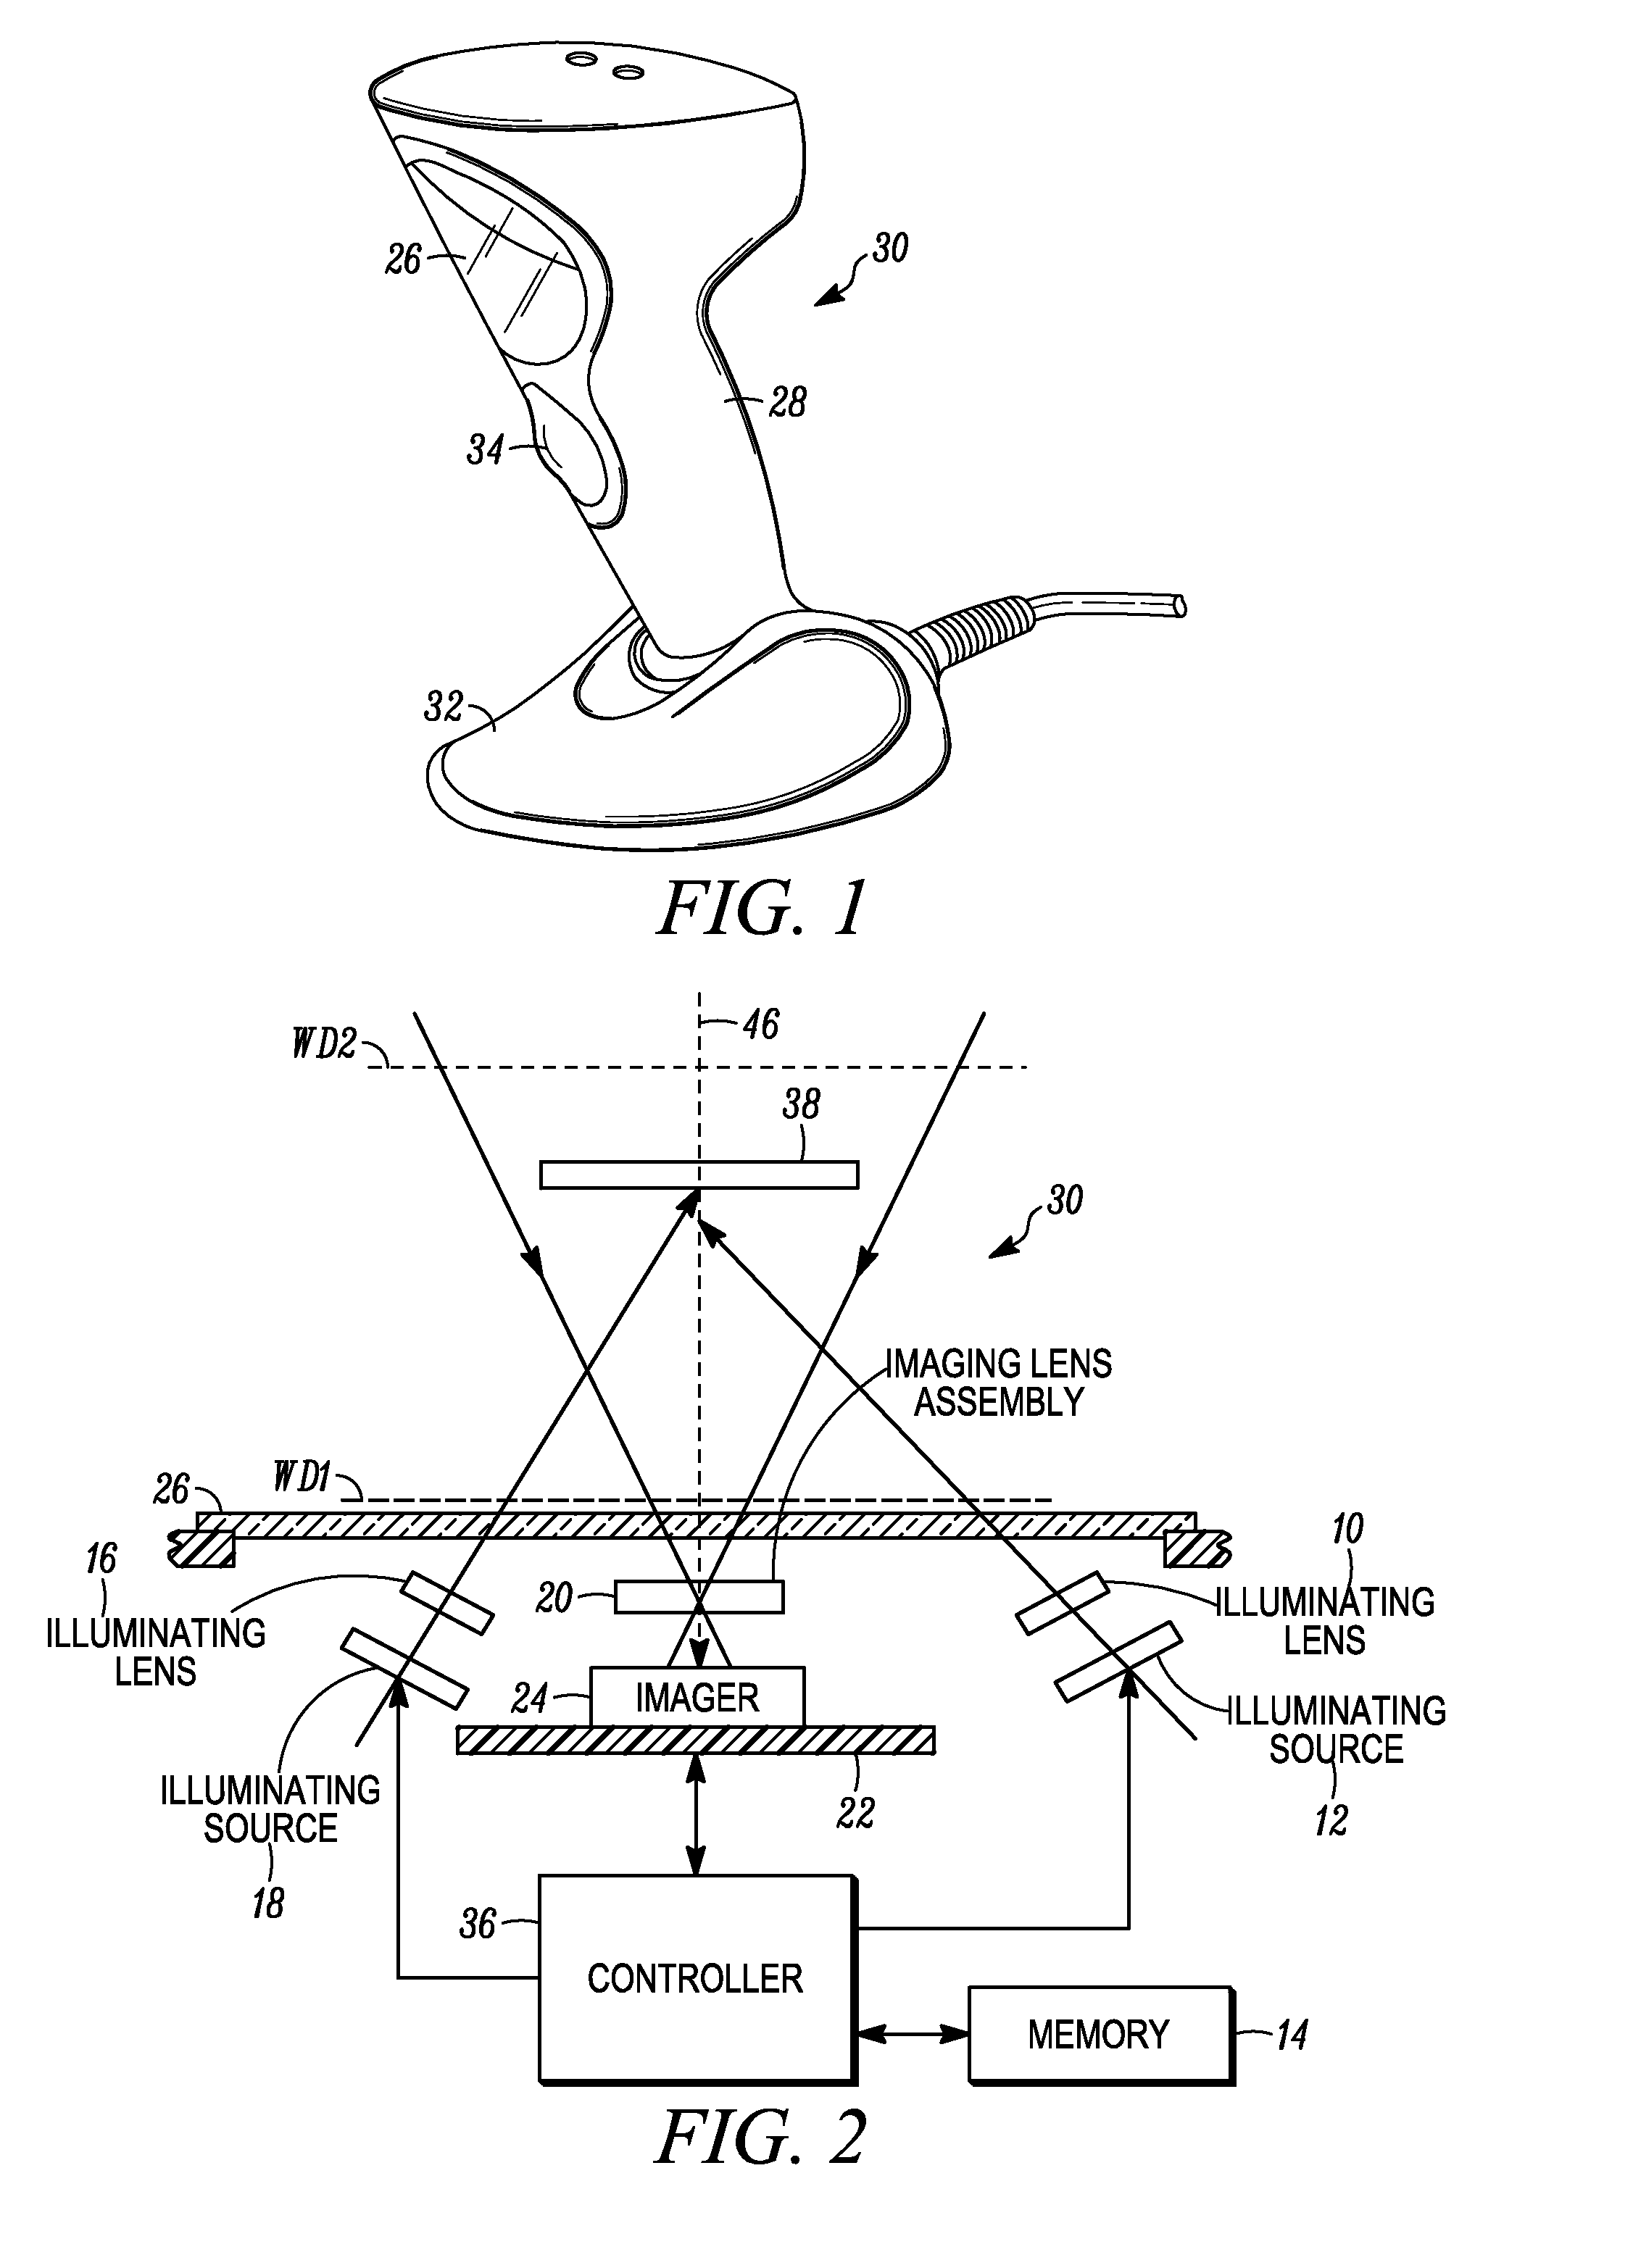 Compact hybrid imaging lens assembly in an imaging reader